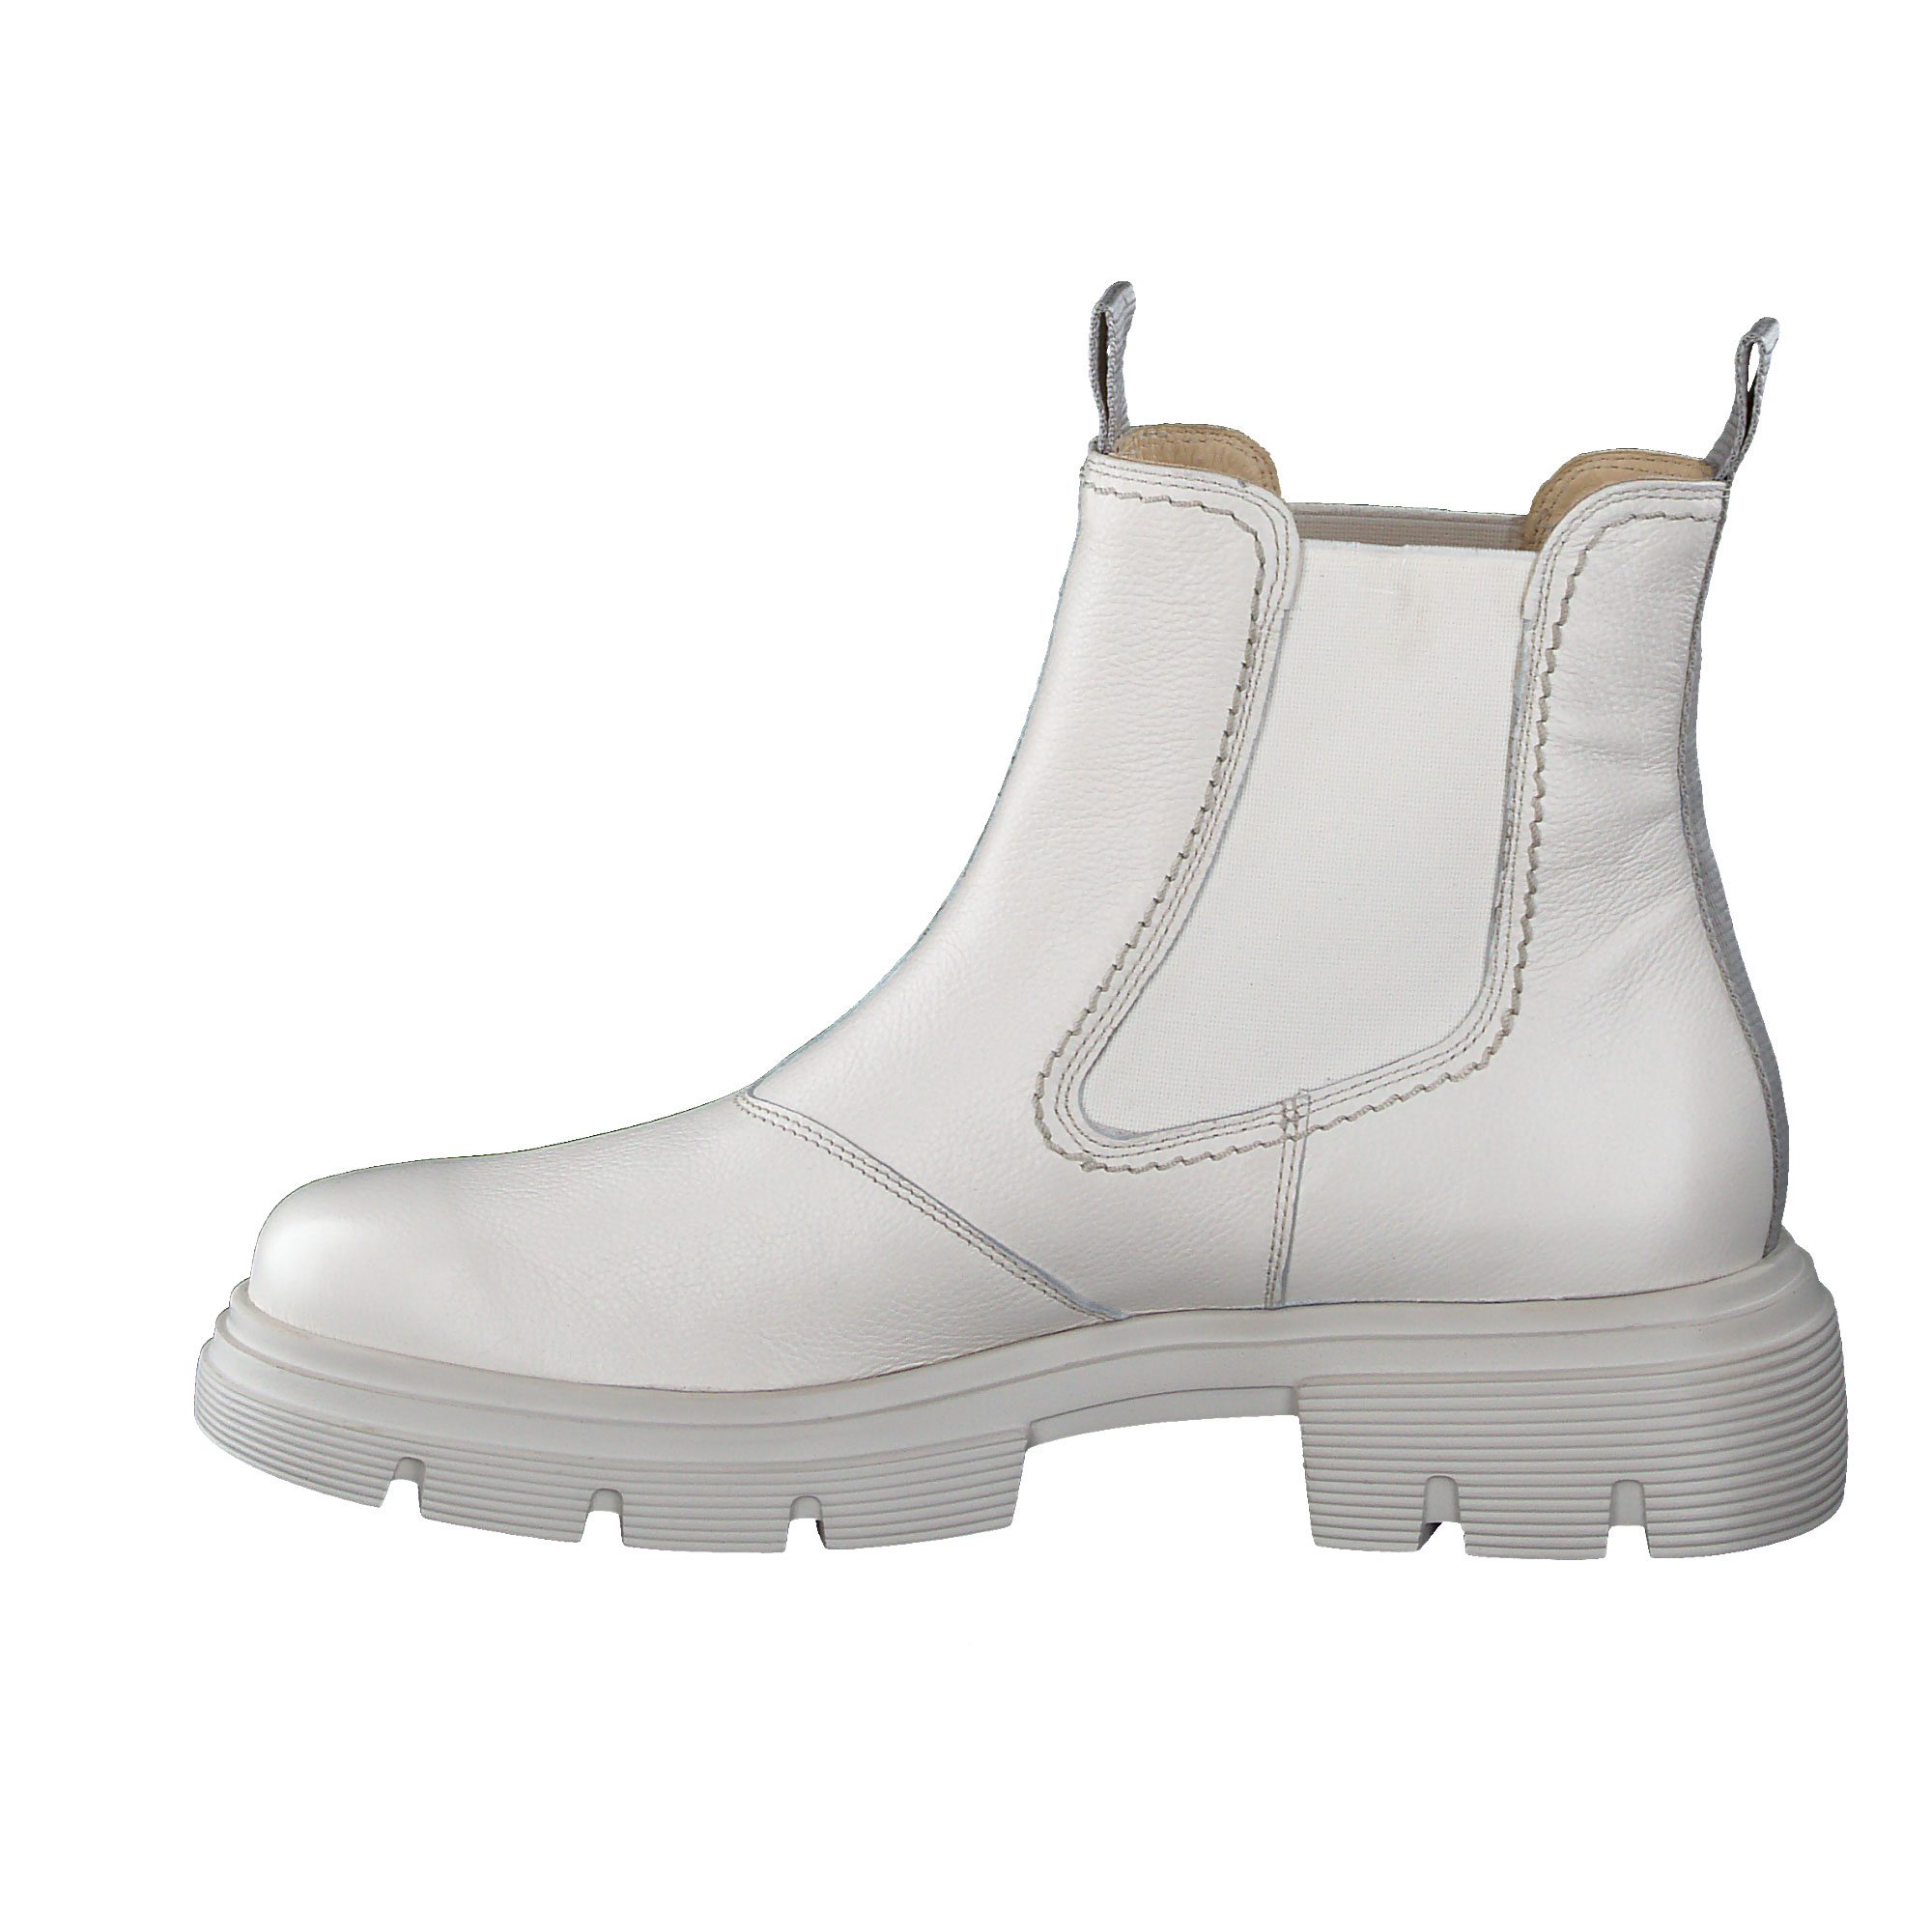 Paul Green Chelsea-Boots - White smooth leather